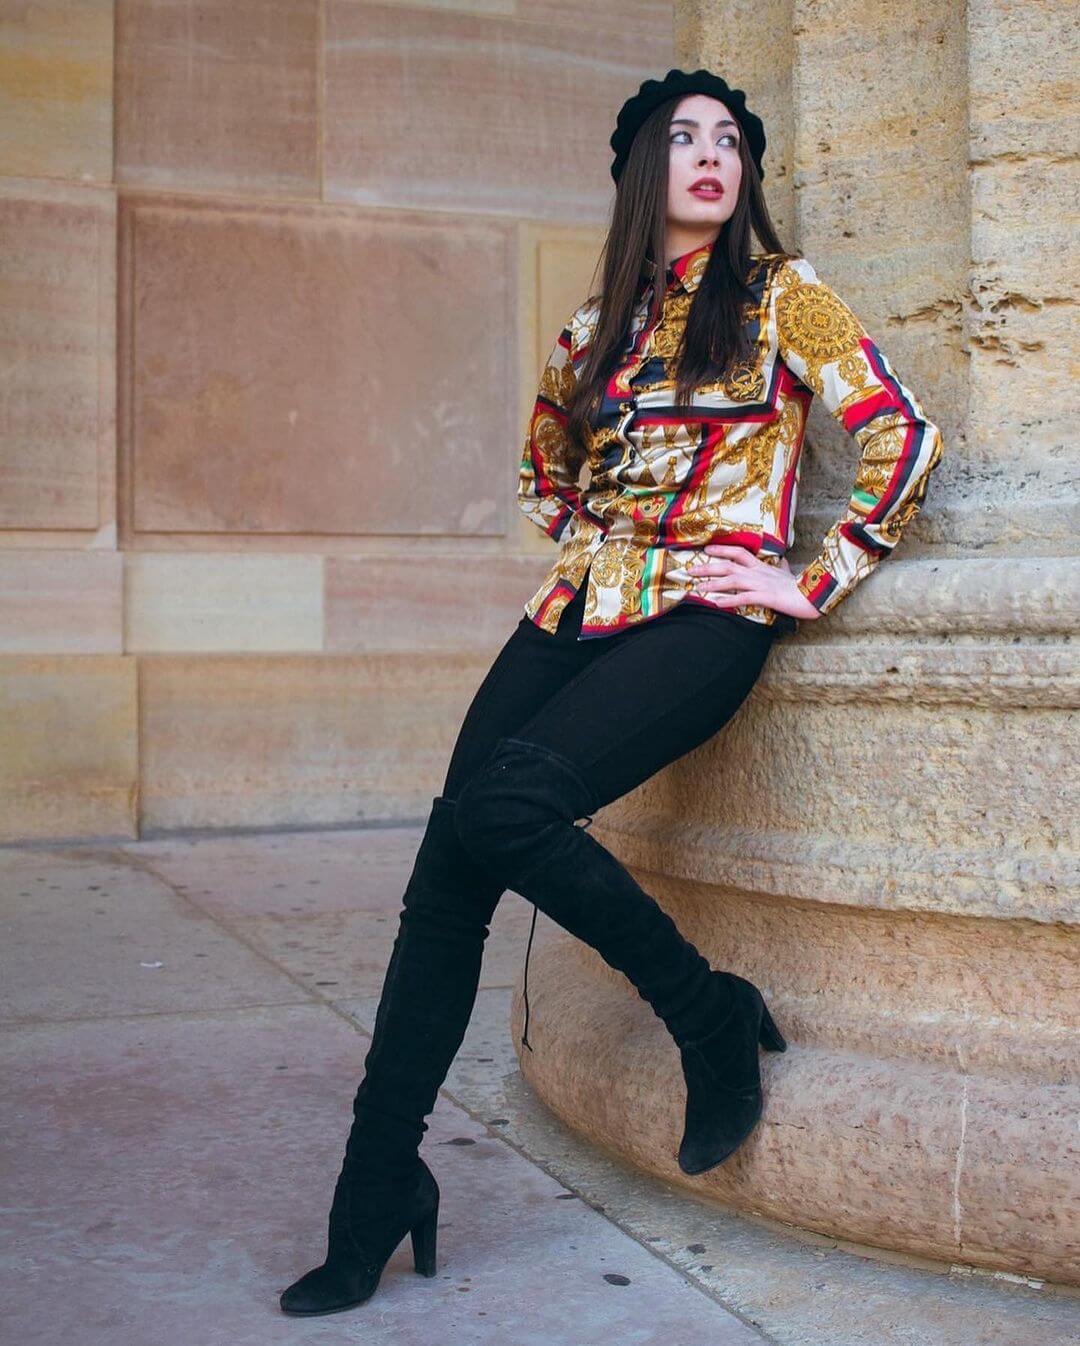 Niki Koss's Stunning Winter Look In Multi-Colored Shirt Paired With Black Jeans